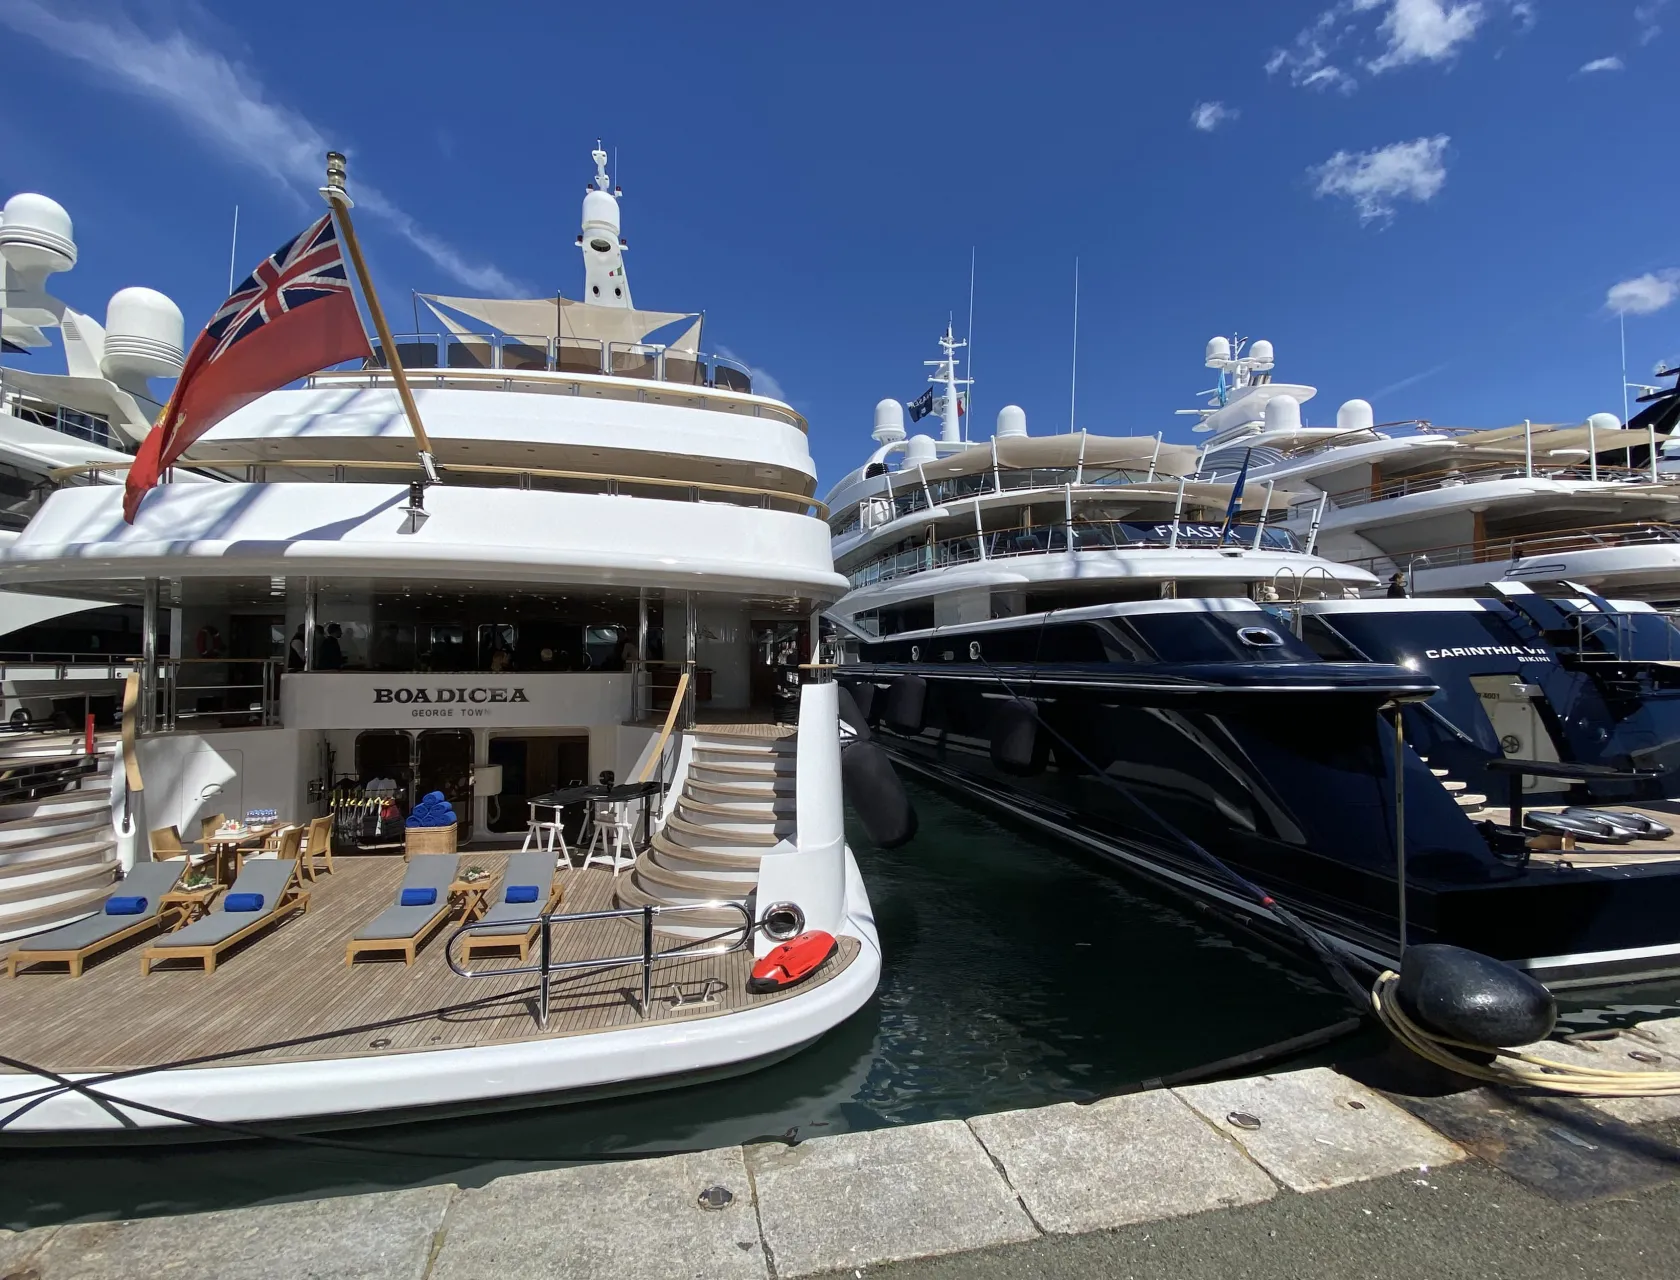 Goolets' Insights From the Best Yachting Shows in the Mediterranean